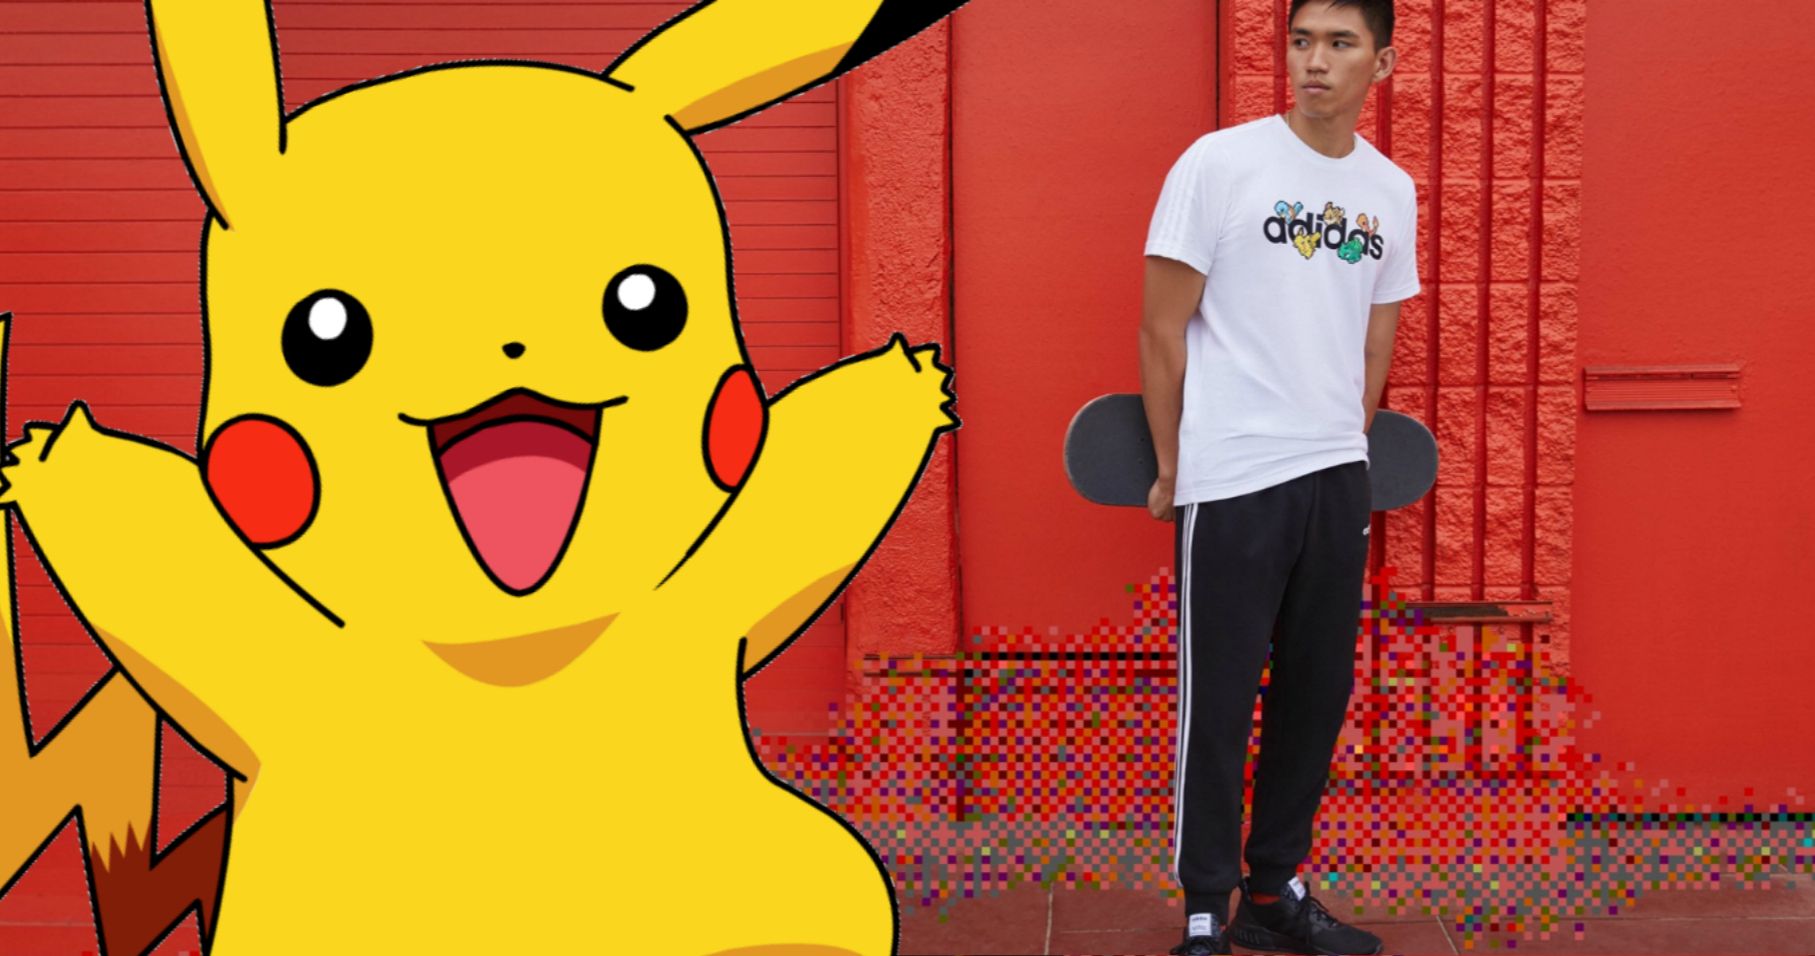 Pokemon Adidas Shoes, Shirts and Jackets Unveiled, You'll Need to Catch 'Em All